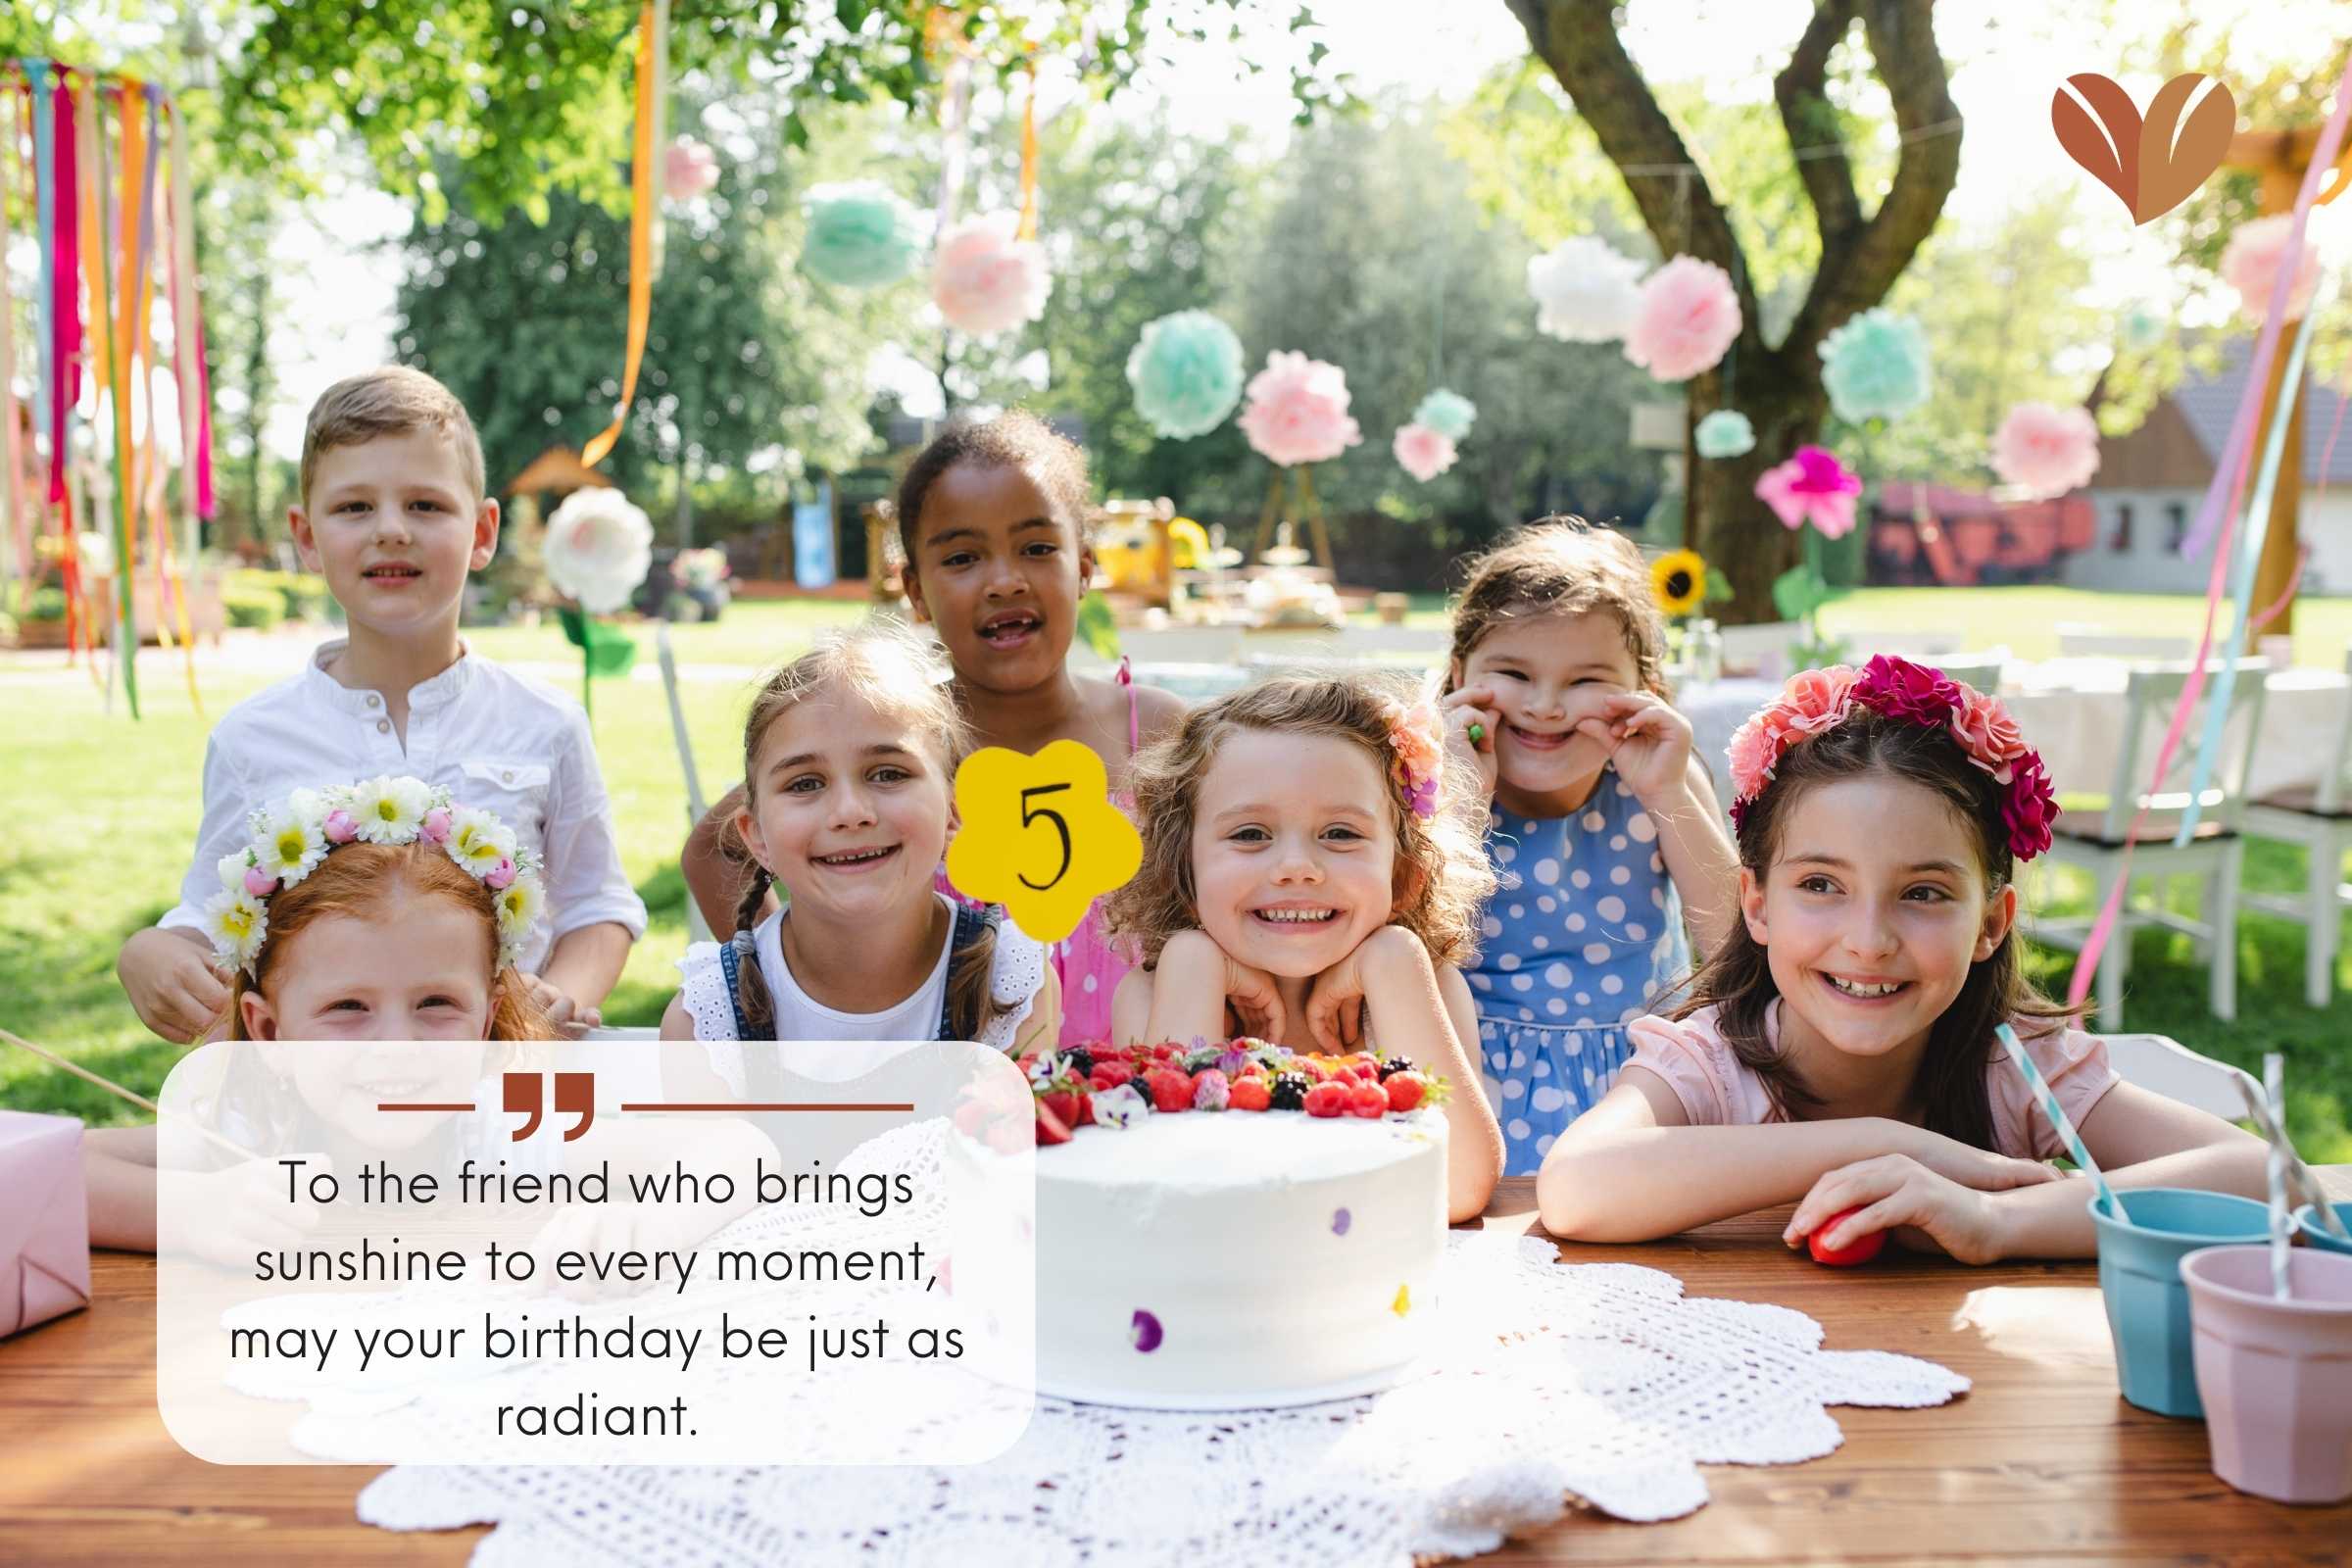 Friendship's essence in 'birthday wishes for friend,' a day of joy and shared celebrations.